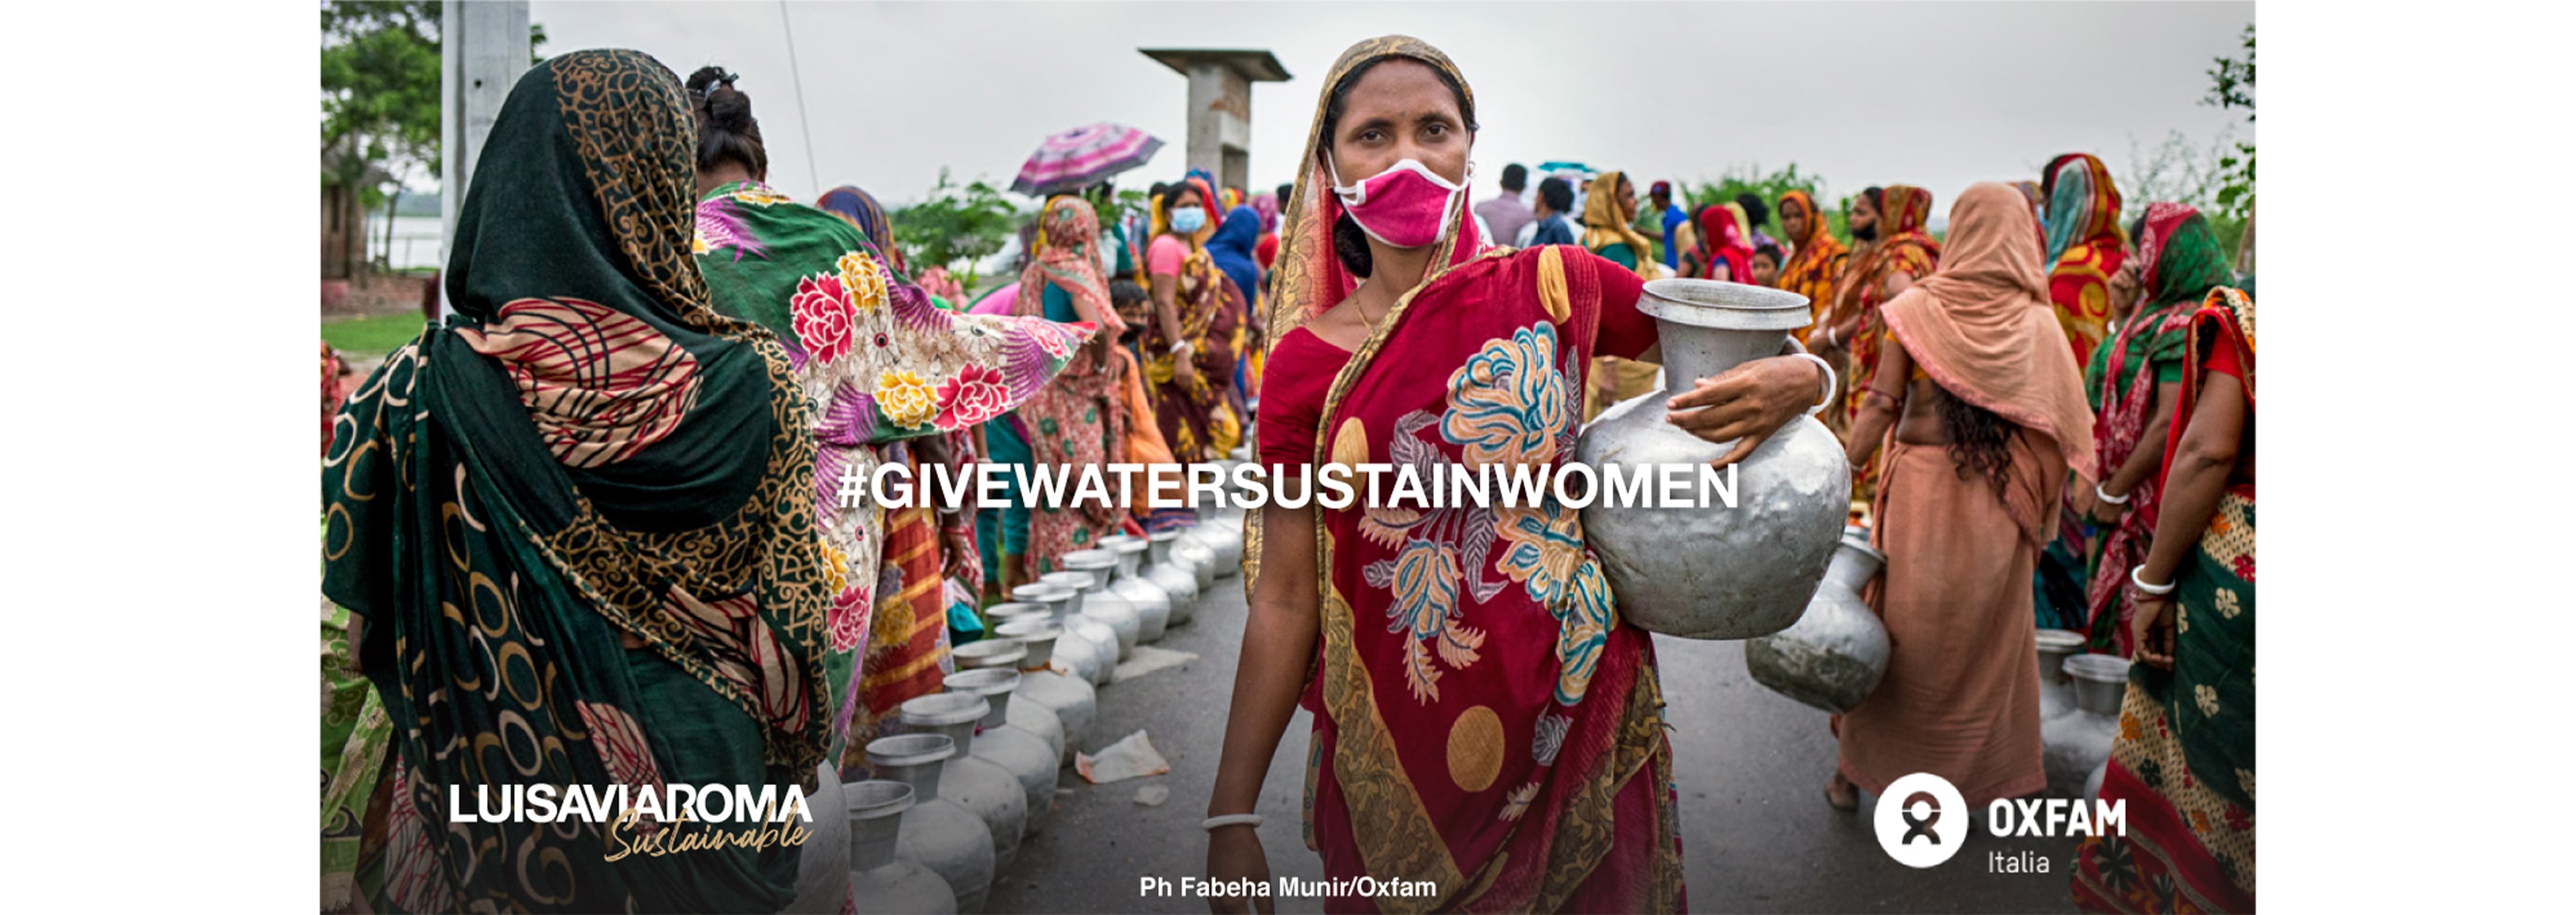 LVRSustainable & Oxfam Italy 후원 캠페인. Give Water, Sustain Women: Dorothy’s Story